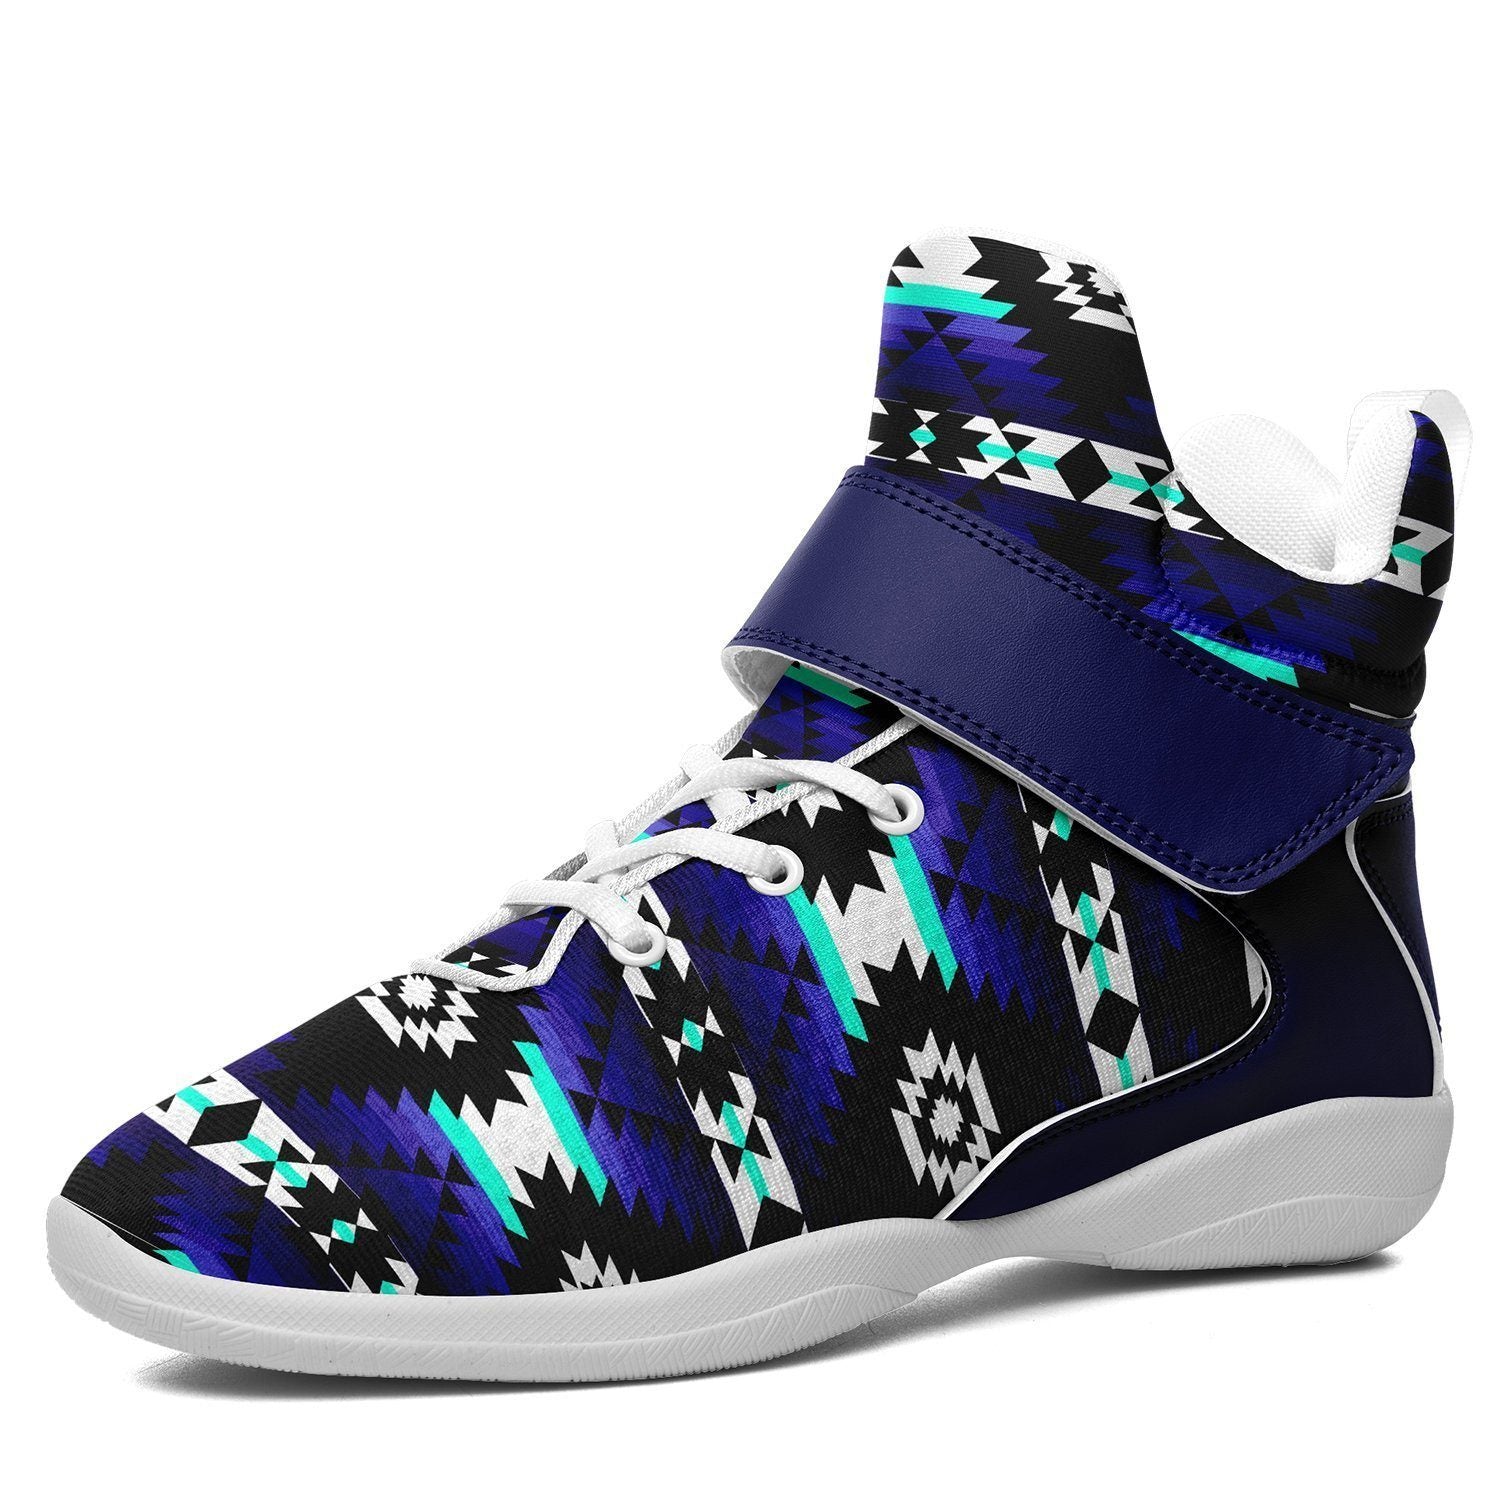 Cree Confederacy Midnight Ipottaa Basketball / Sport High Top Shoes - White Sole 49 Dzine US Men 7 / EUR 40 White Sole with Blue Strap 